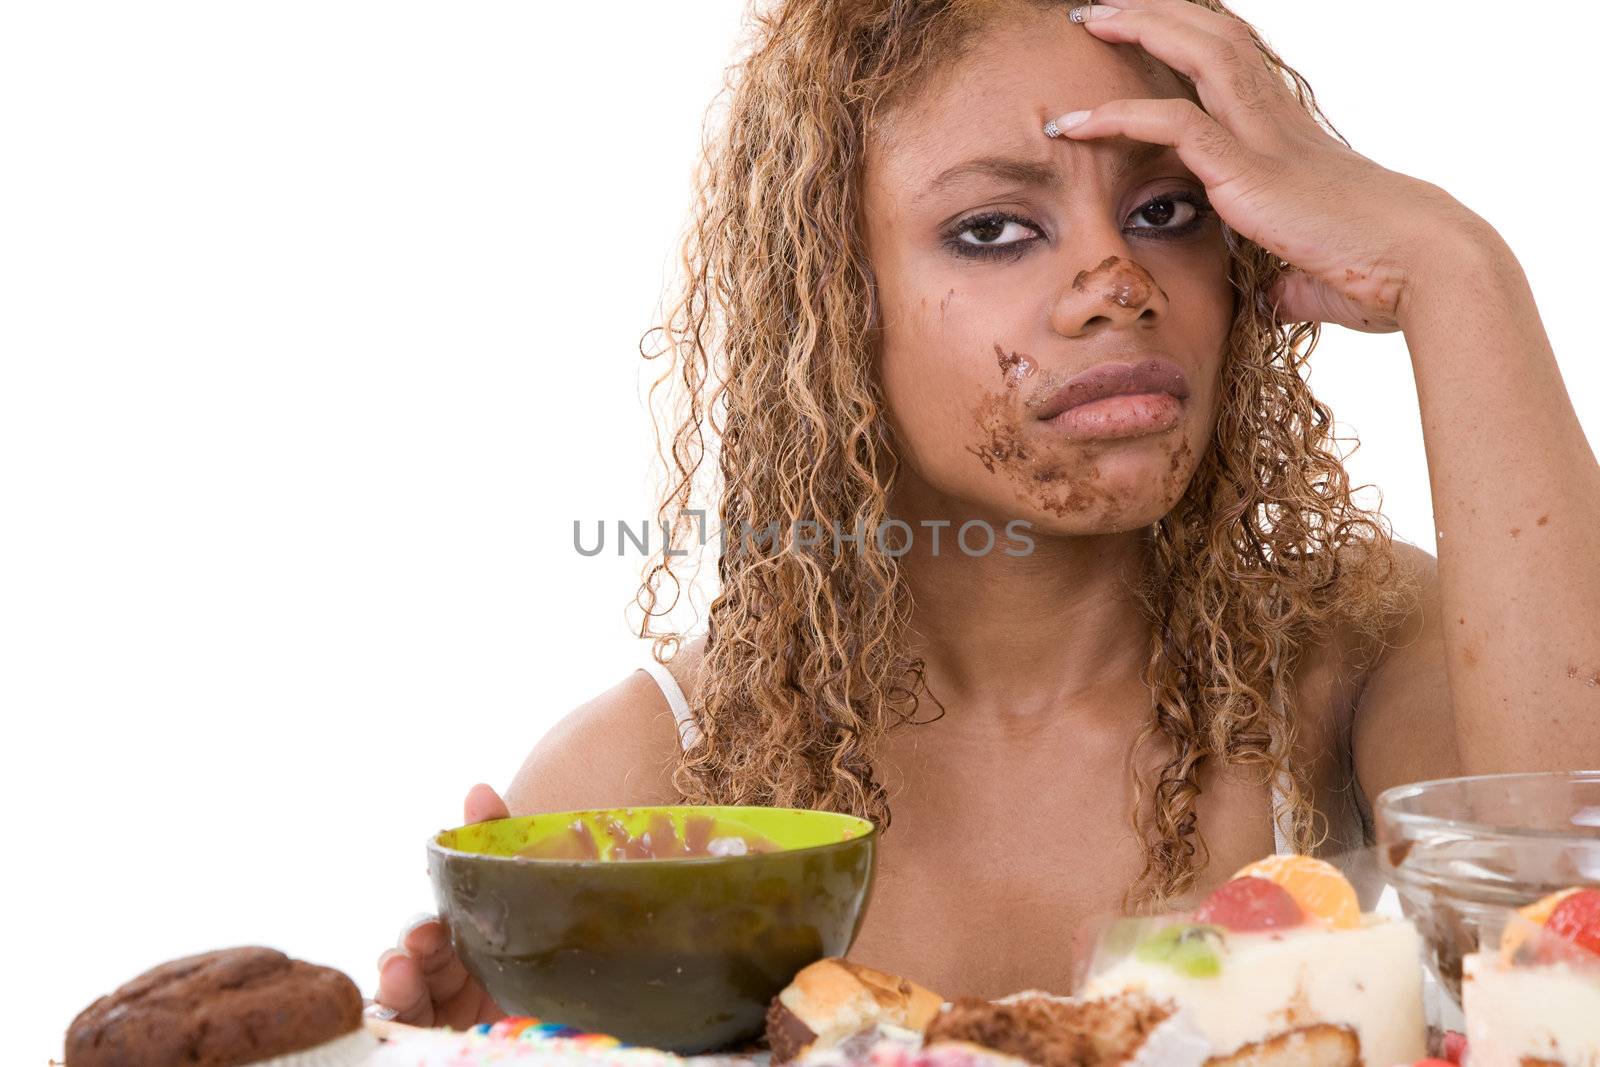 Pretty black woman looking very sick after having eating too much